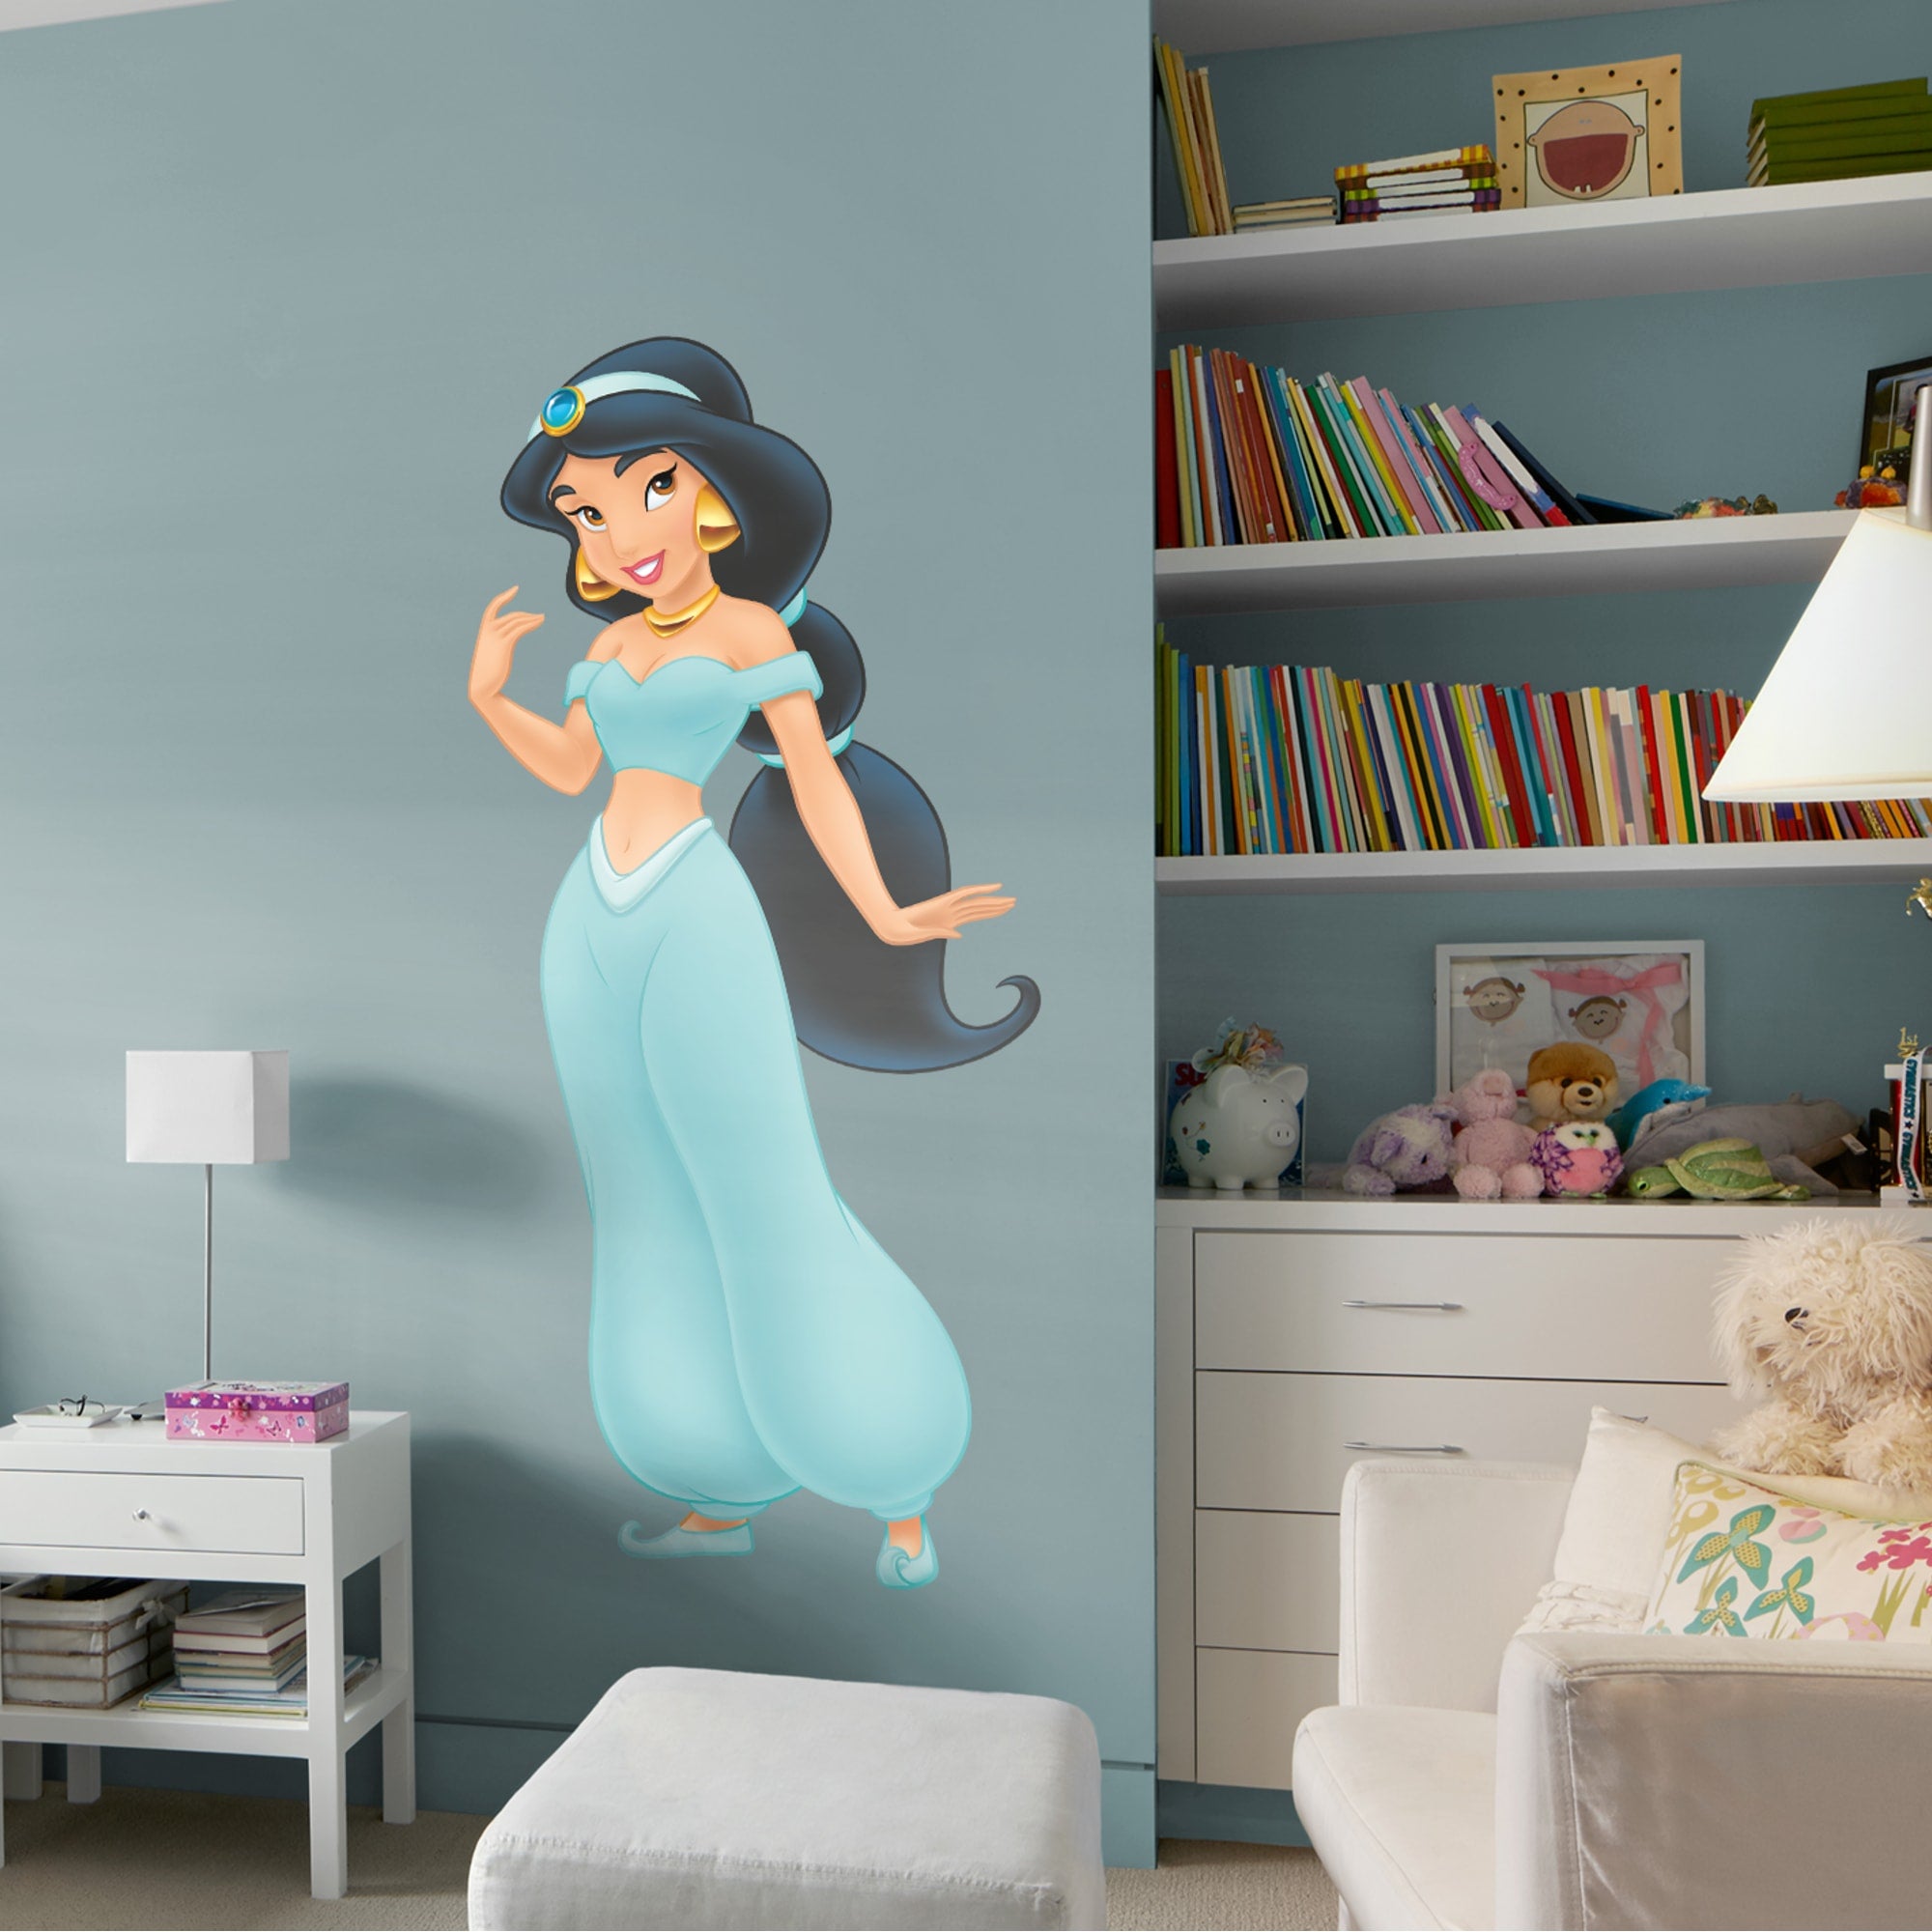 Jasmine - Officially Licensed Disney Removable Wall Decal 28.0"W x 63.0"H by Fathead | Vinyl